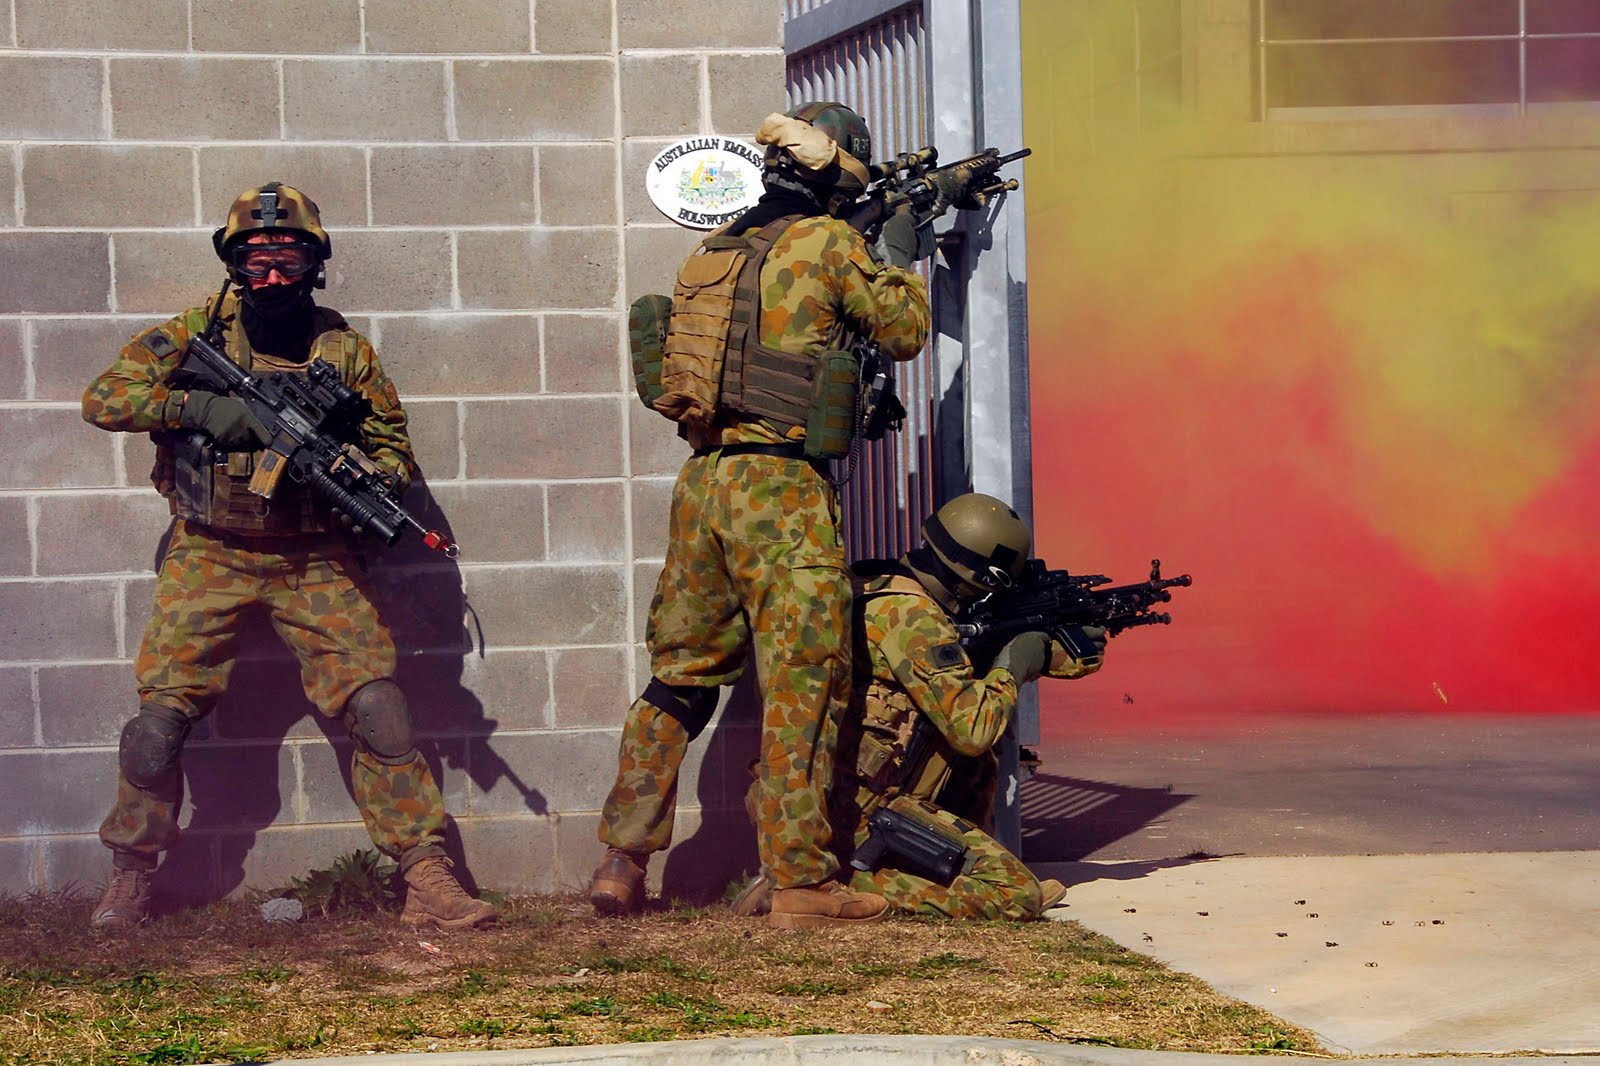 Tactical Assault Group East. Special Operations Unit - Signal Forces. Картинки z v армия. Australian Special Forces что это Tactical Assault Group эмблема.